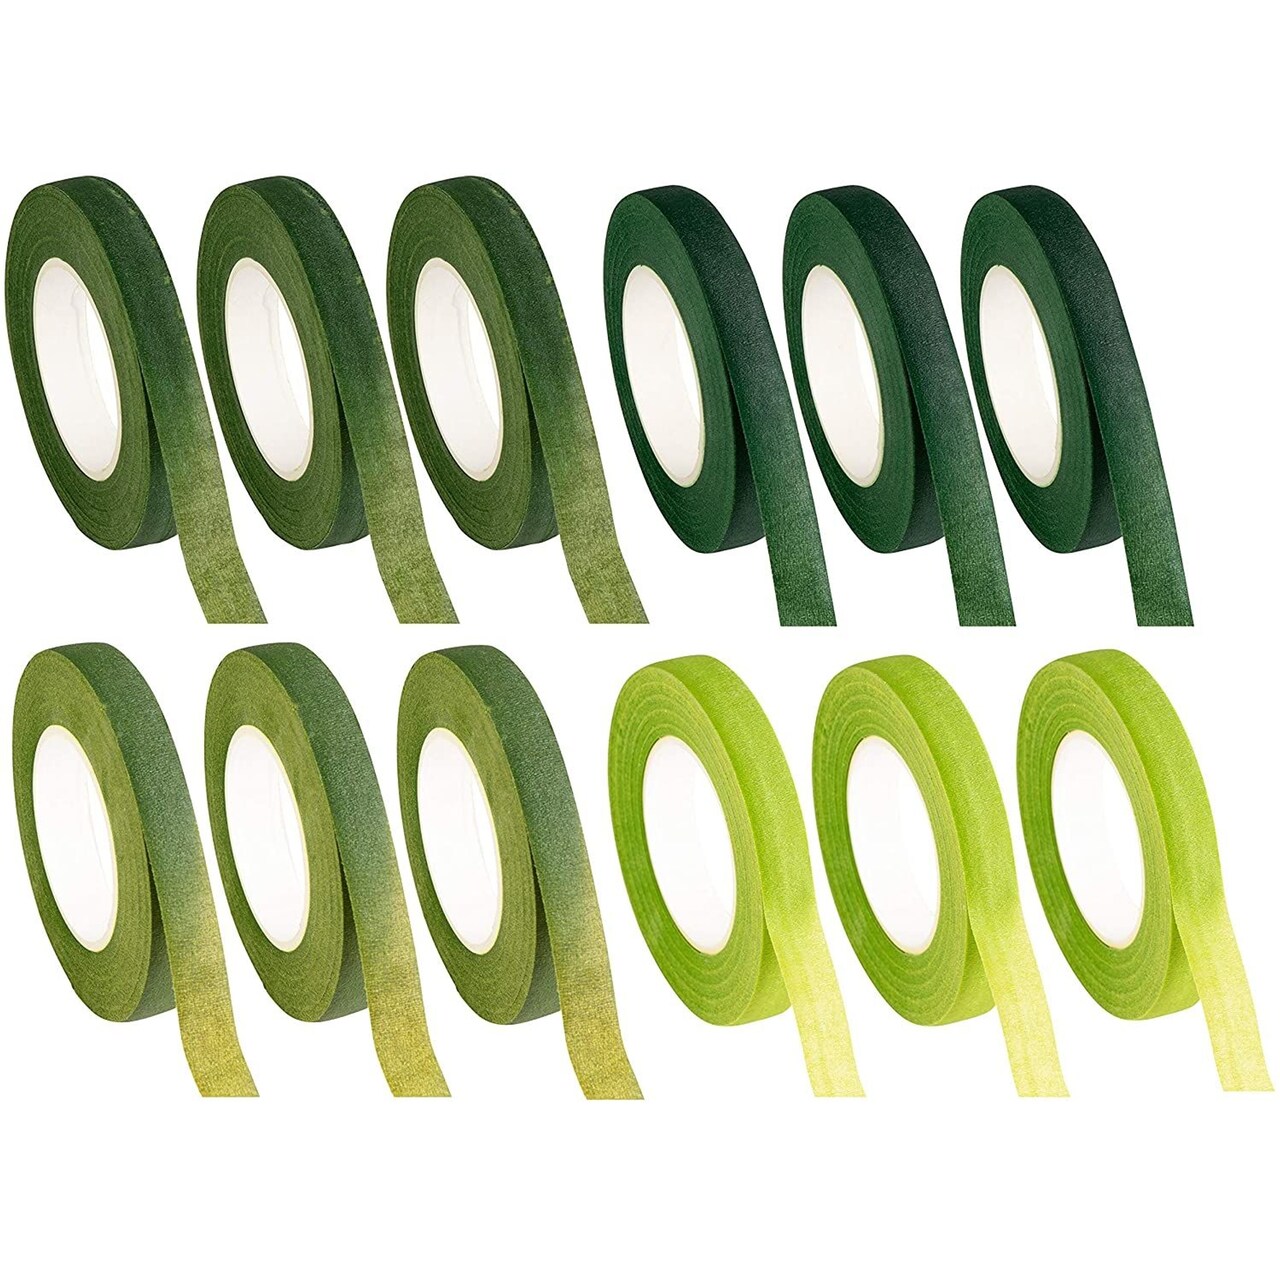 Floral Tape - 12-Pack Florist Tape, Green Floral Adhesives, Perfect for  Bouquet Stem Wrapping, Floral Arrangement and Crafts, 0.47 Inches x 30  Yards